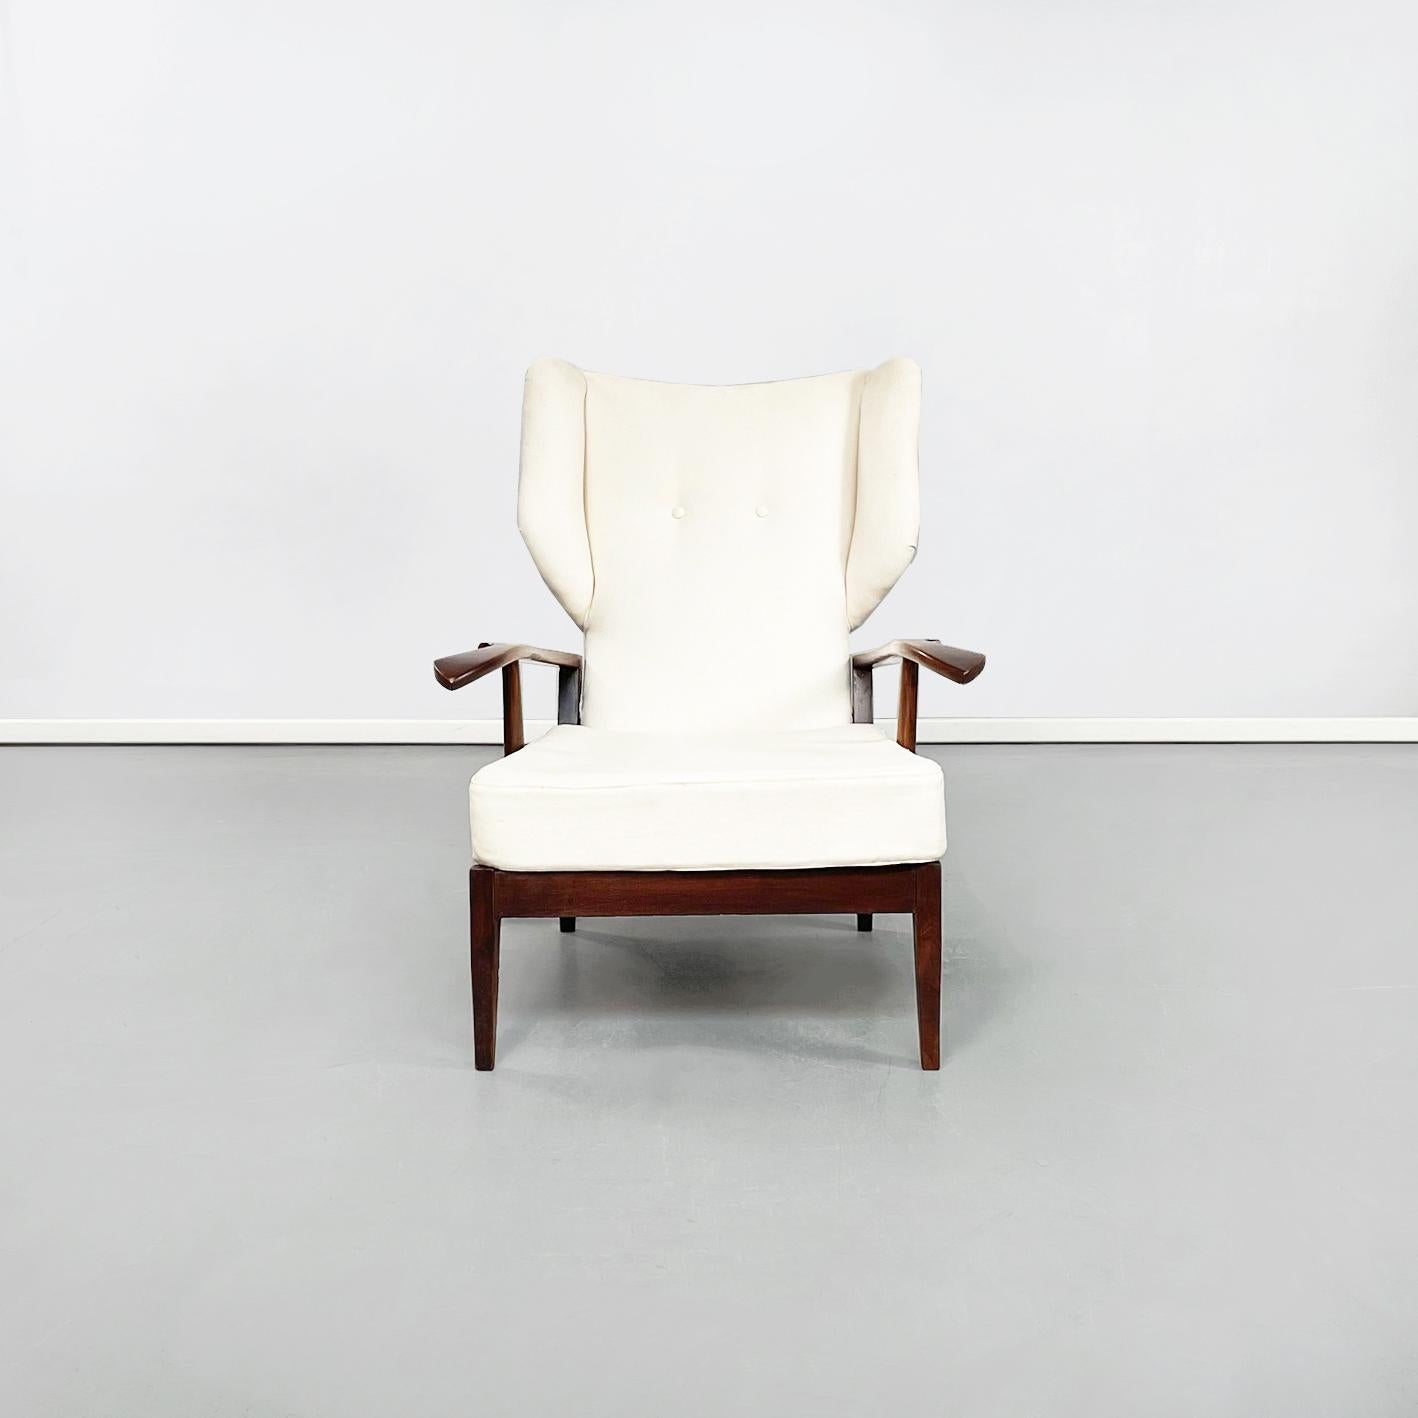 Italian mid-century White fabric and wooden armchair by Paolo Buffa, 1950s
Armchair with wooden structure. The seat is made up of a padded cushion in white fabric, supported by a metal structure. The armrests are irregularly curved in wood. The